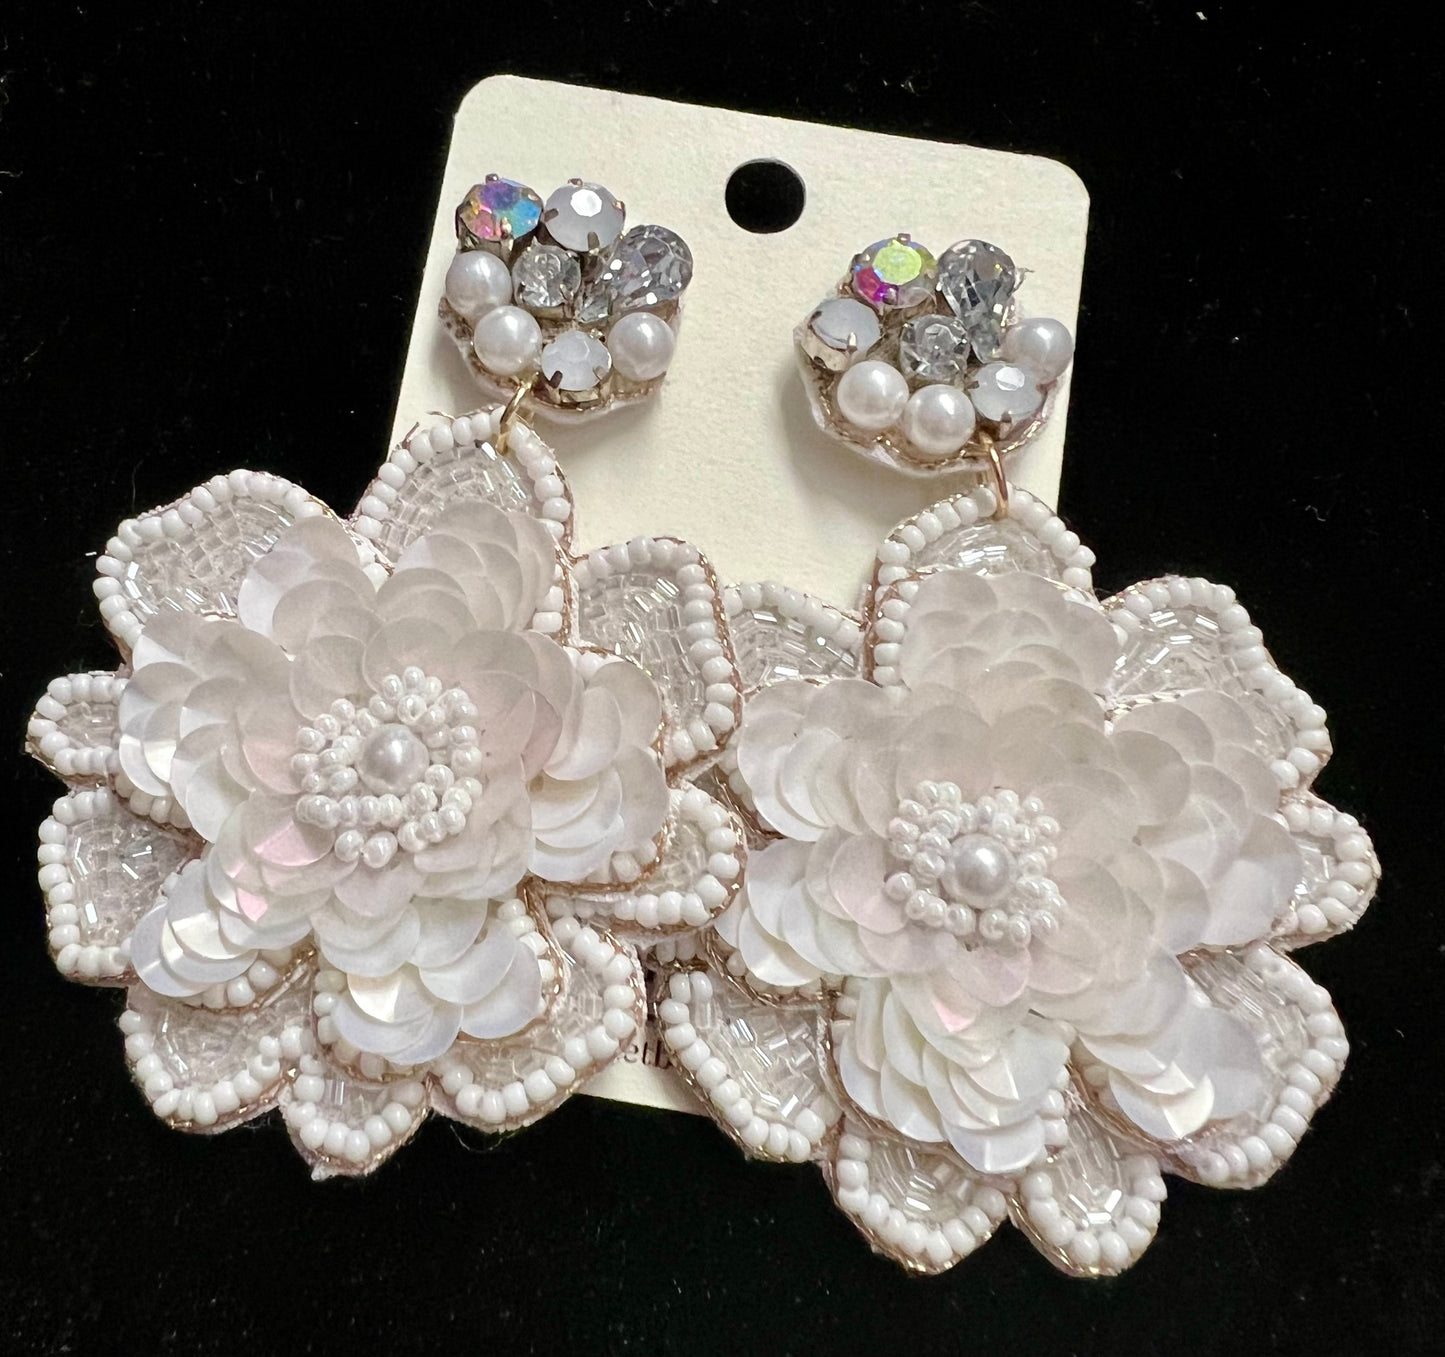 Jeweled Floral Bead Mix Drop Earrings: White